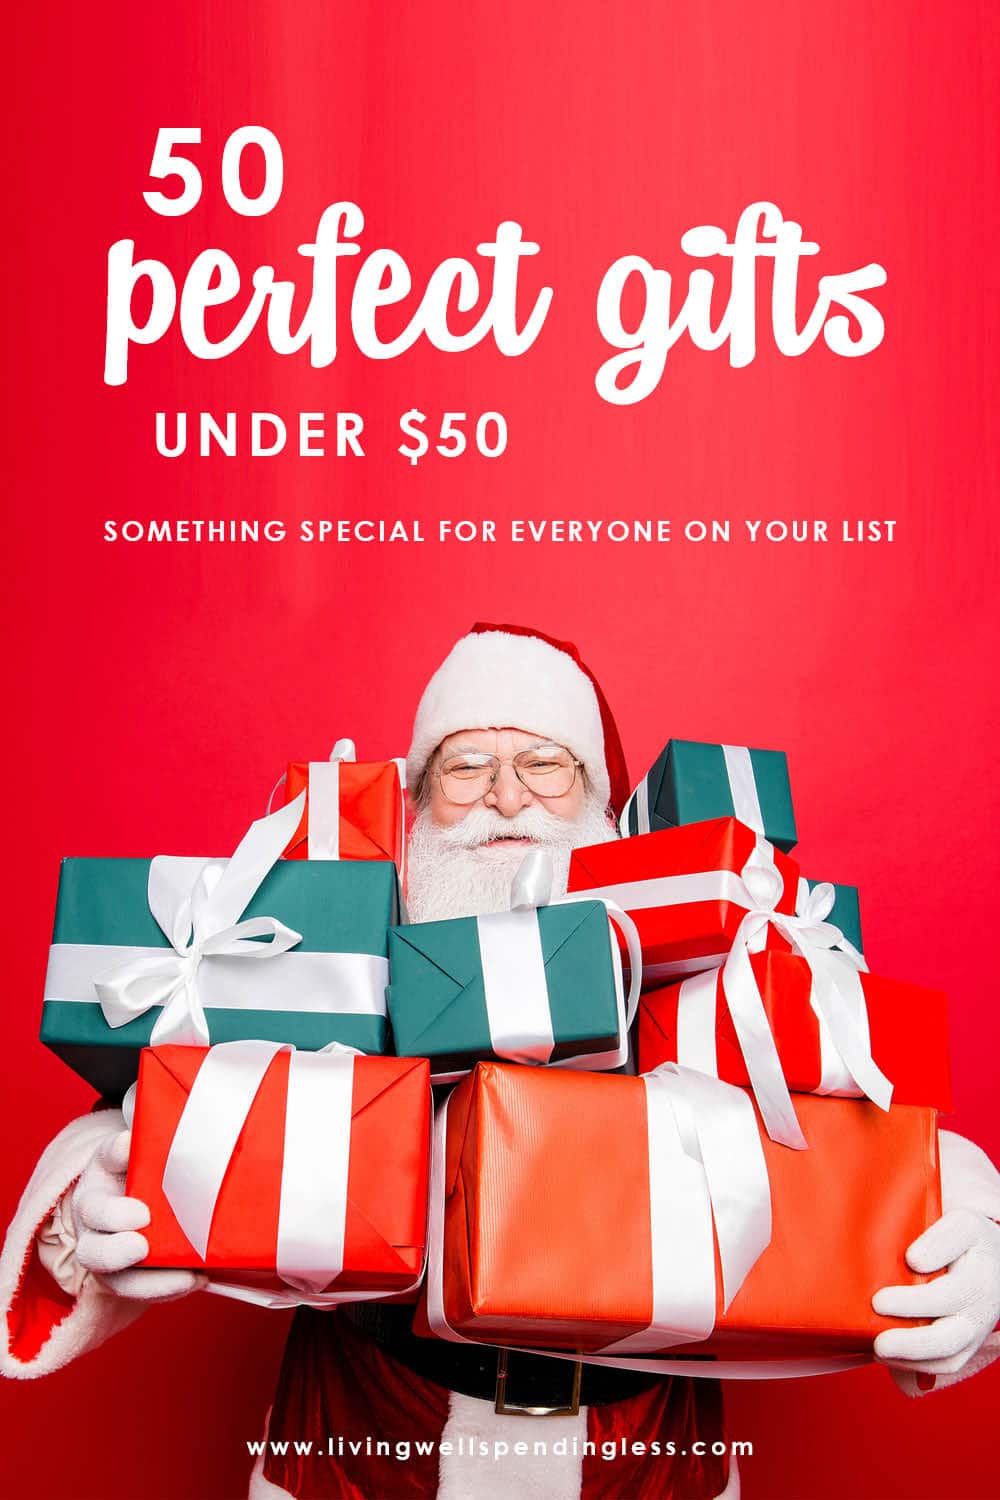 Cheap Holiday Gifts 2020 - Best Christmas Gifts Under $10